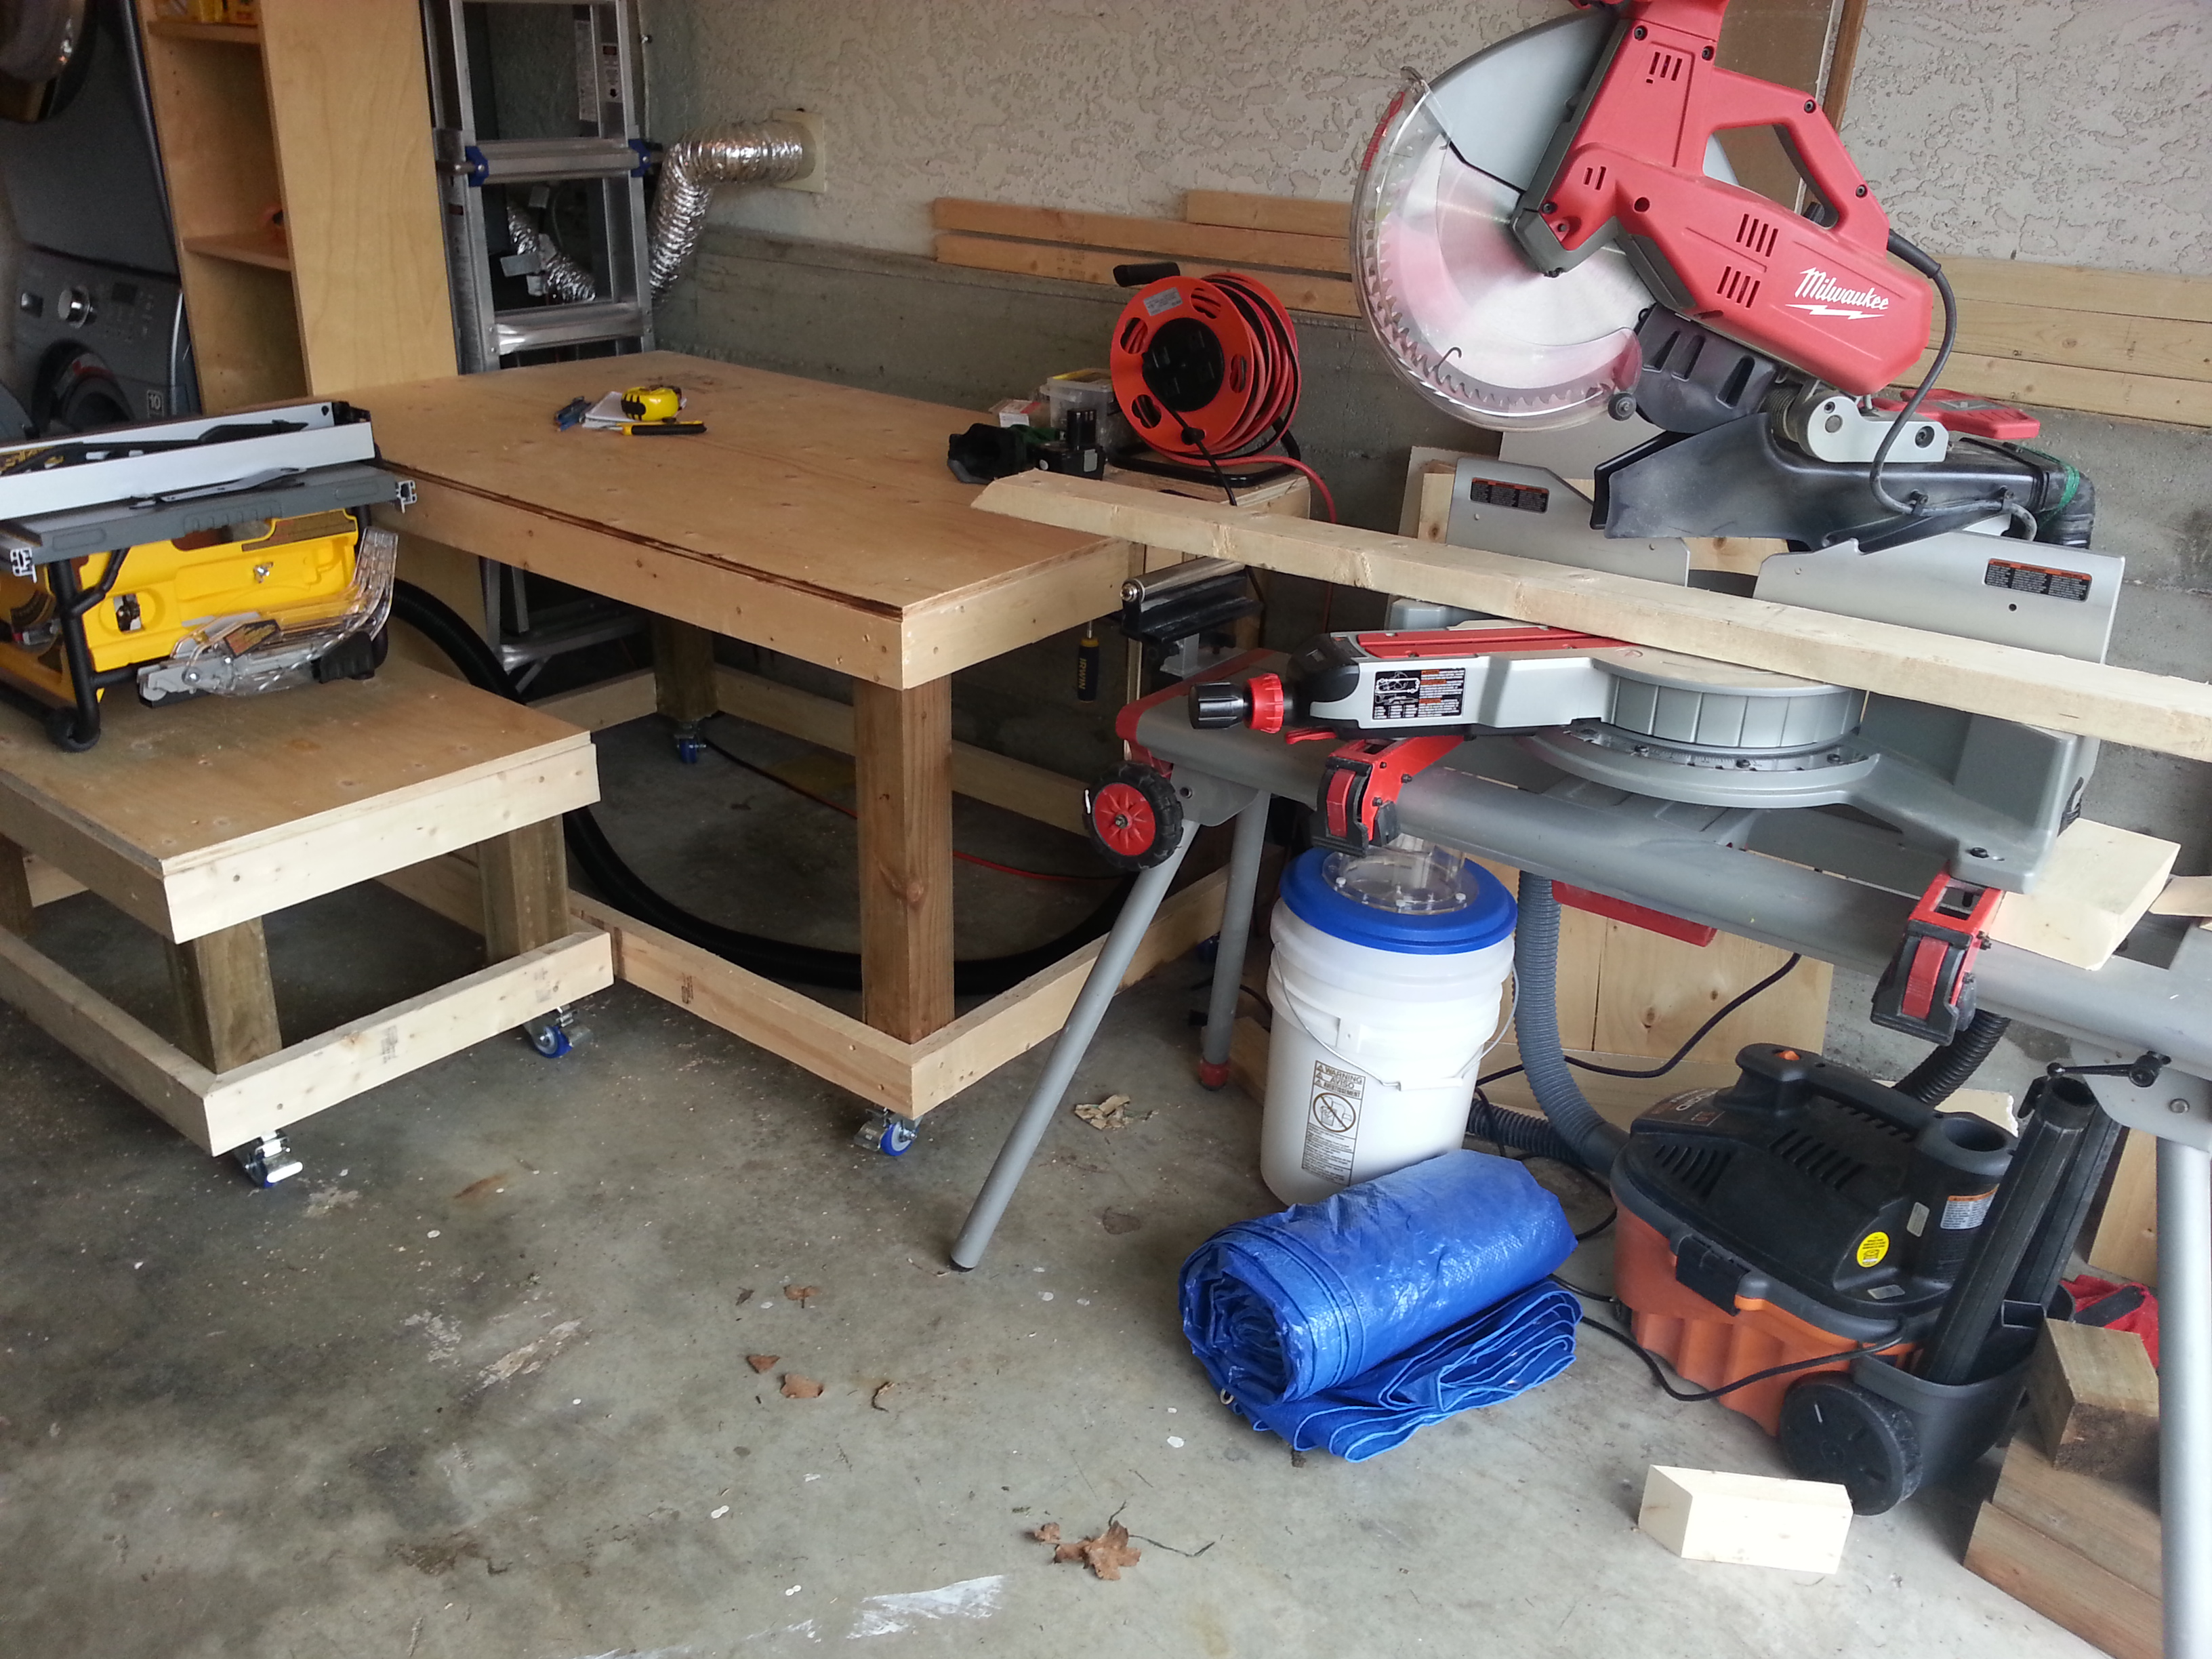 I made the work benches with casters on them so I can pull them out and position them for better space.